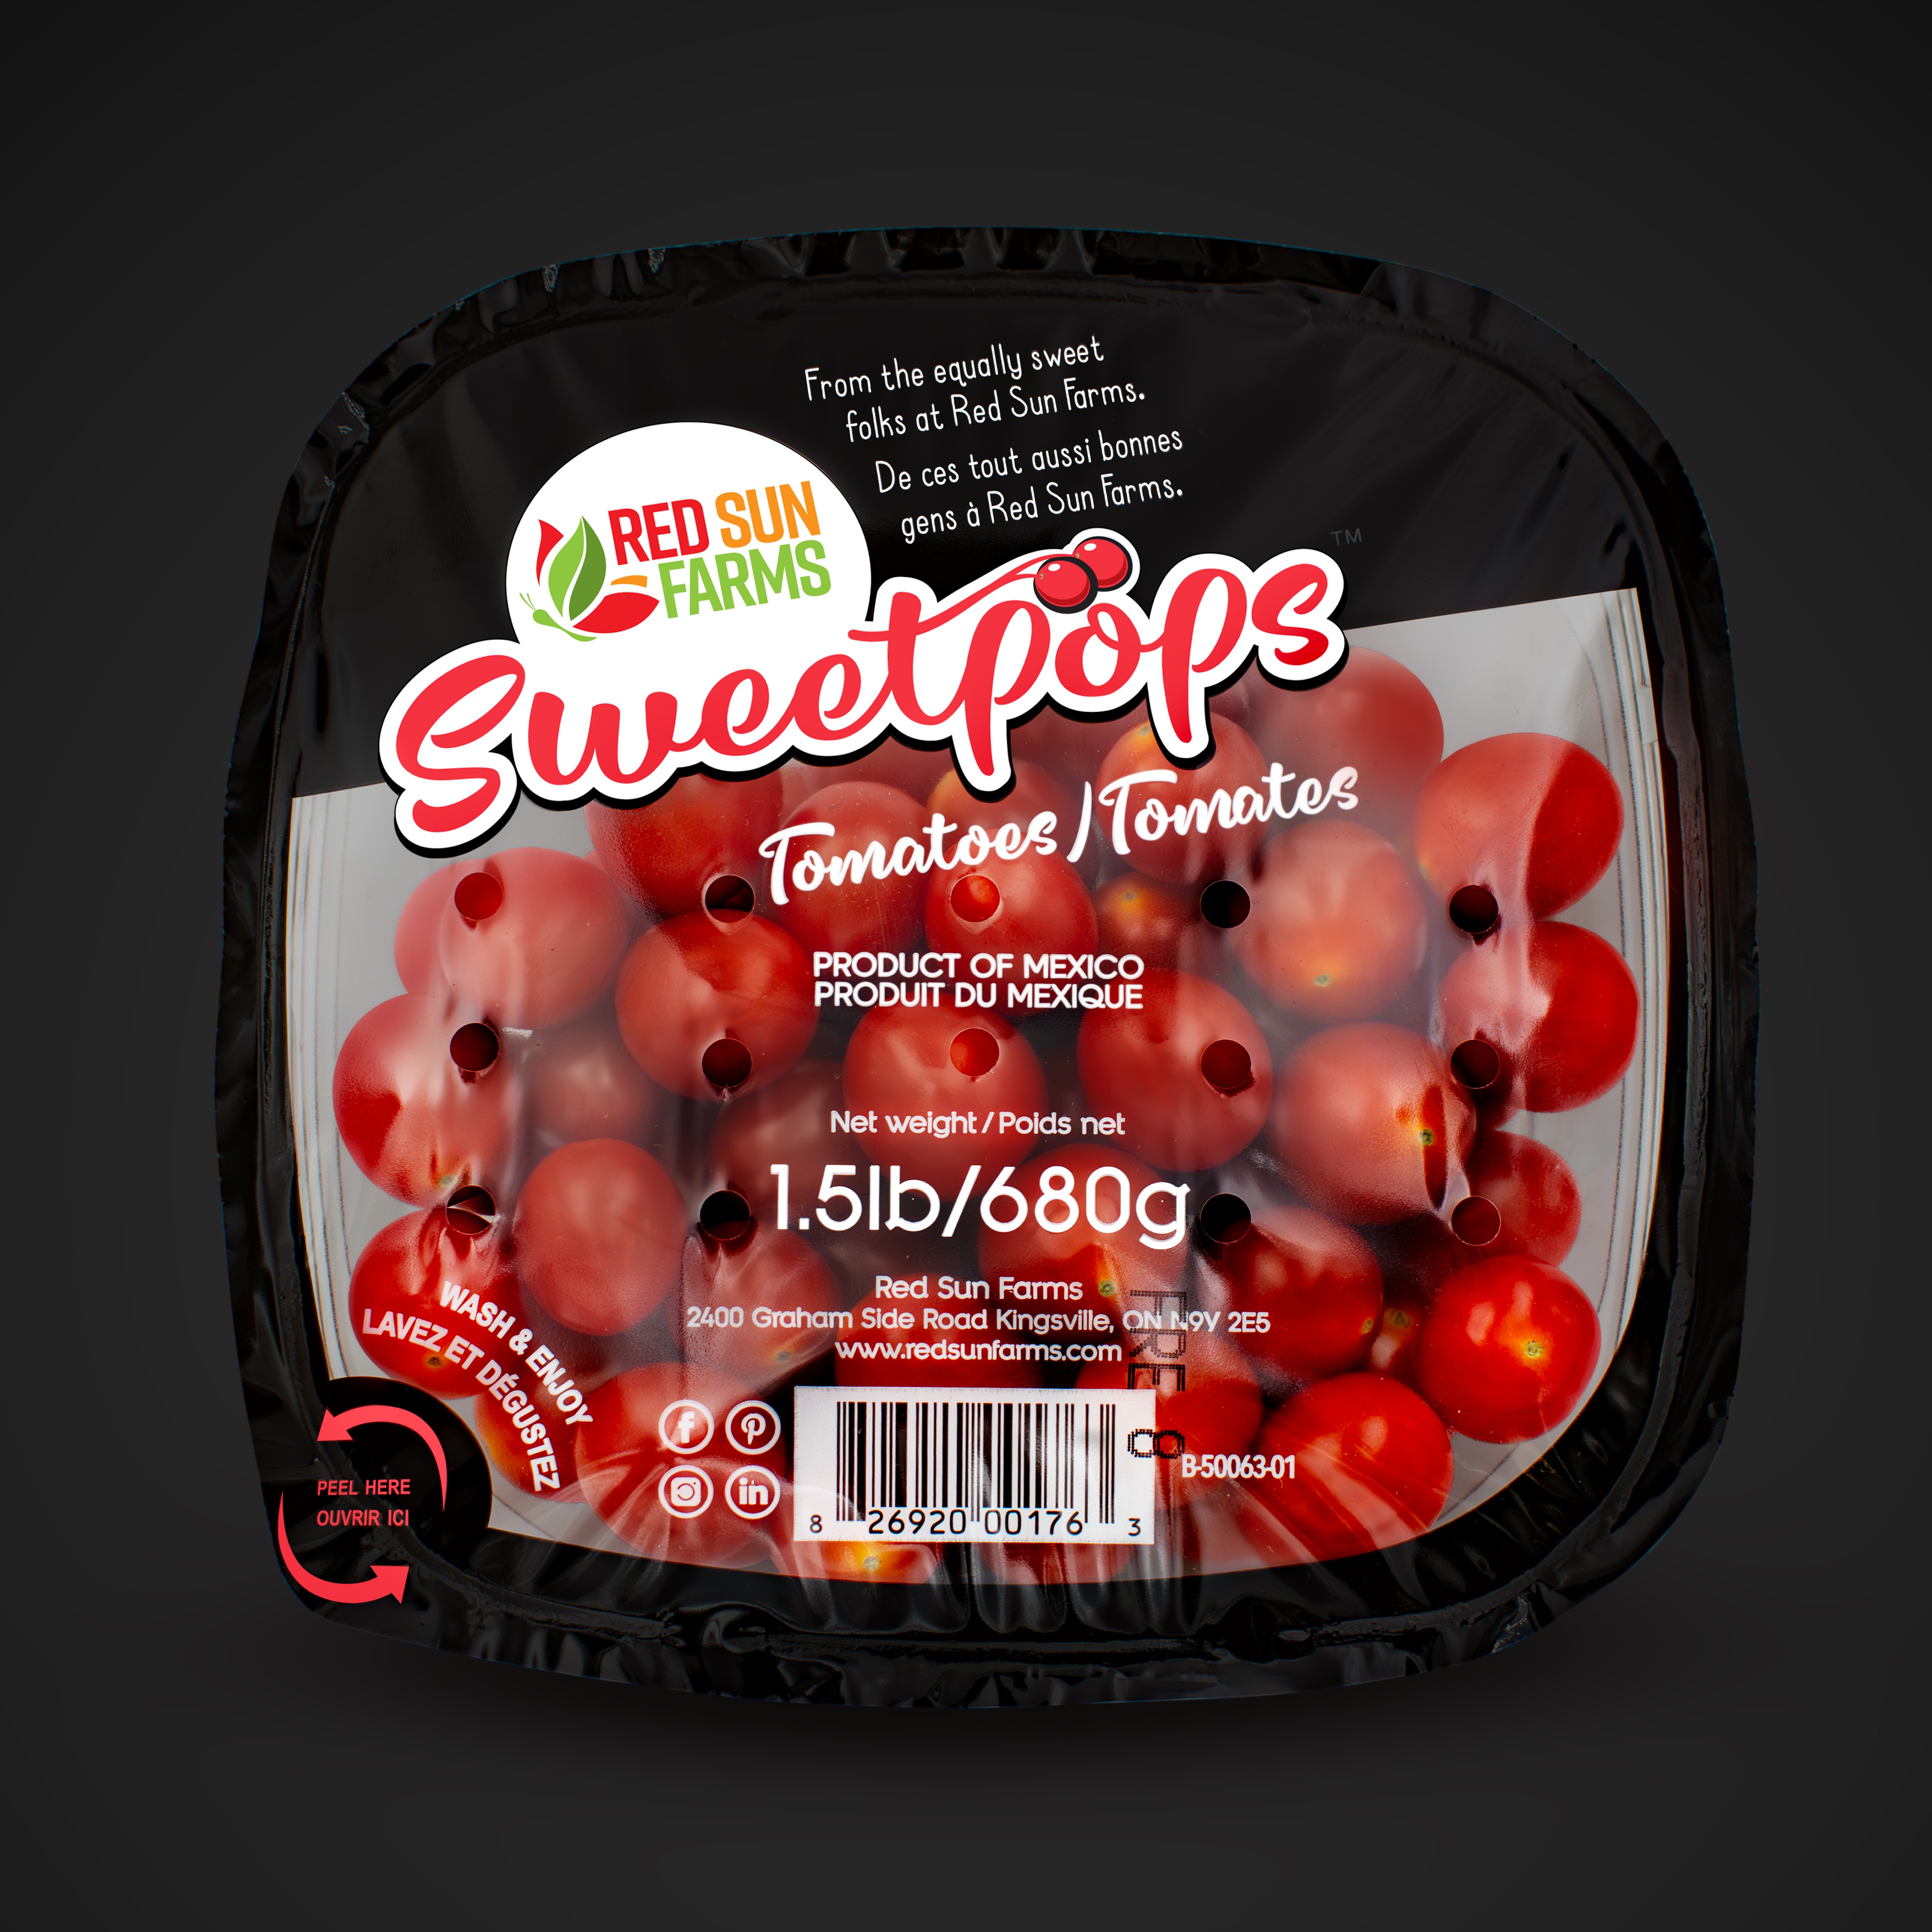 Hey Canada! Introducing Sweetpops Tomatoes 913